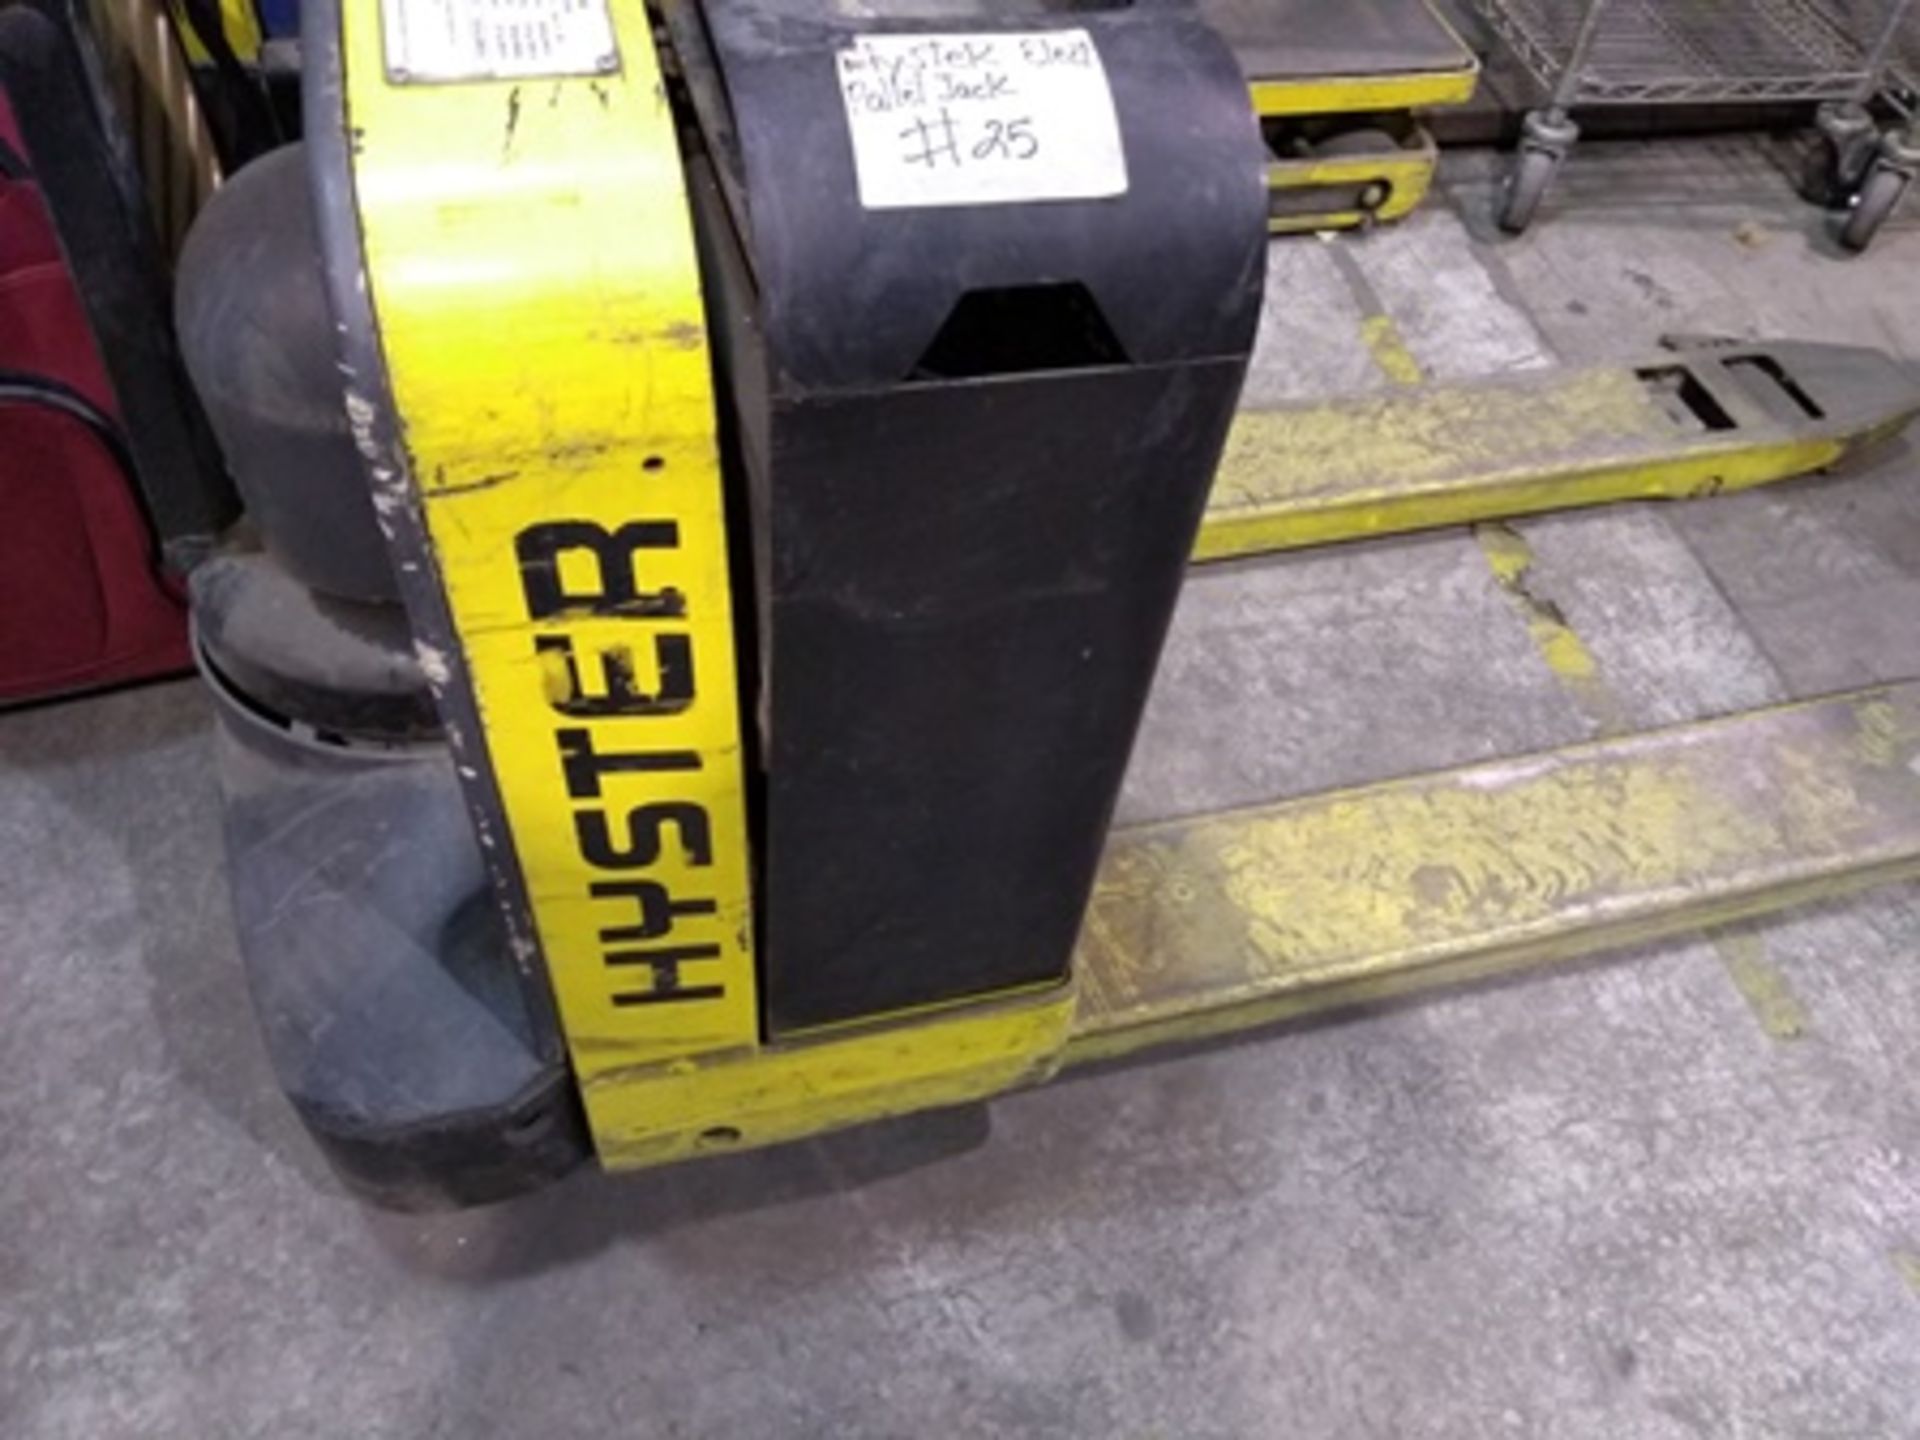 Hyster Electric Pallet Jack, model W40z, max load 4,000 pounds, built-in charger and 24V battery - Image 4 of 17